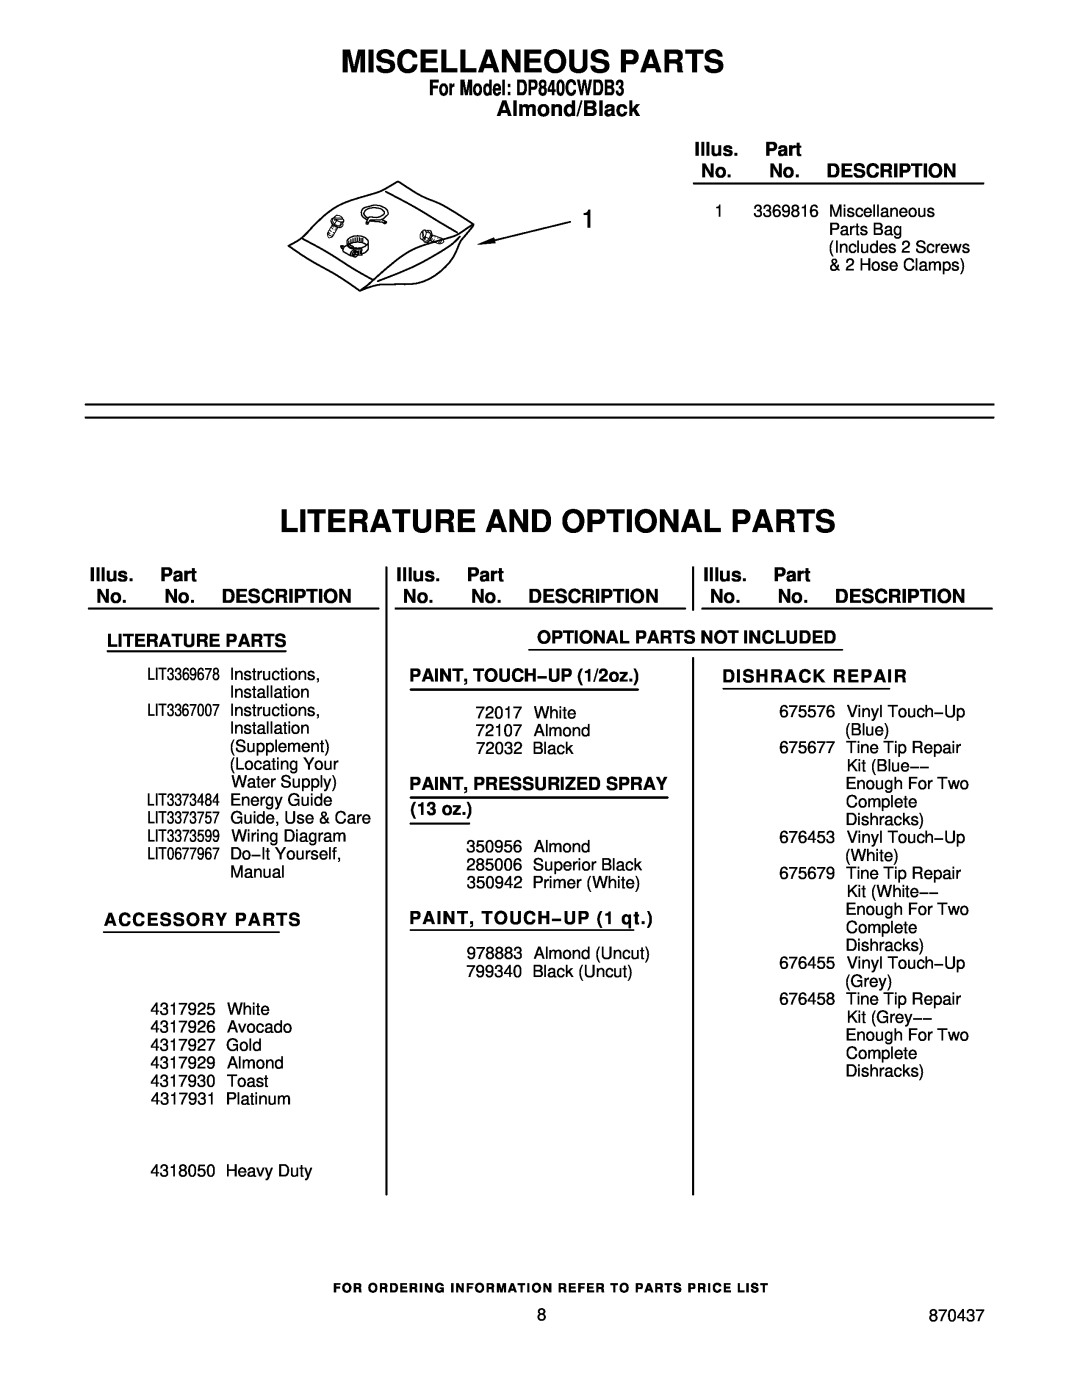 Whirlpool manual Miscellaneous Parts, Literature And Optional Parts, For Model DP840CWDB3 Almond/Black 